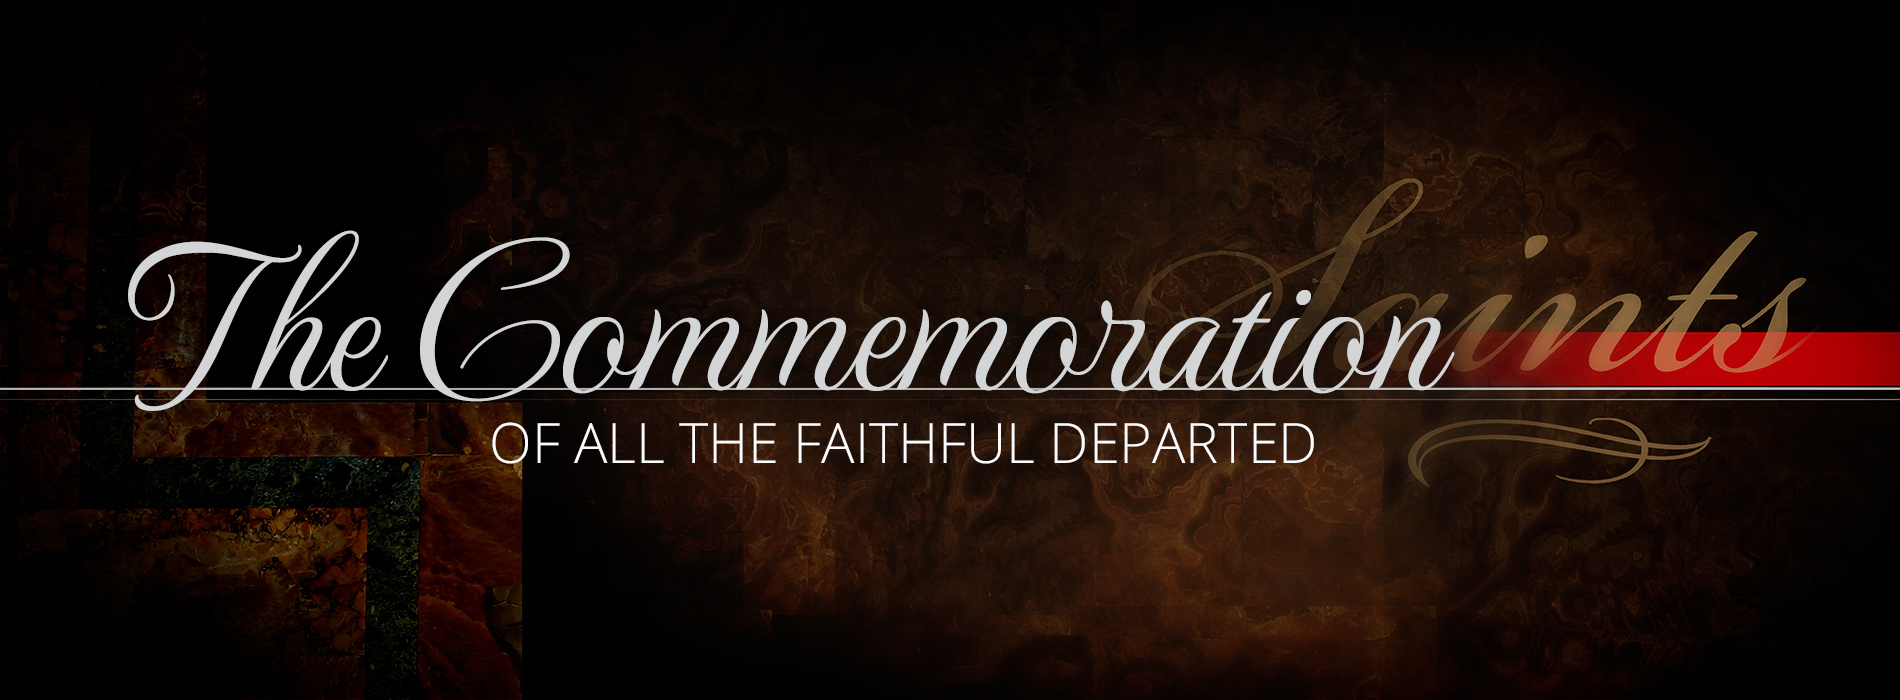 The Commemoration of All the Faithful Departed